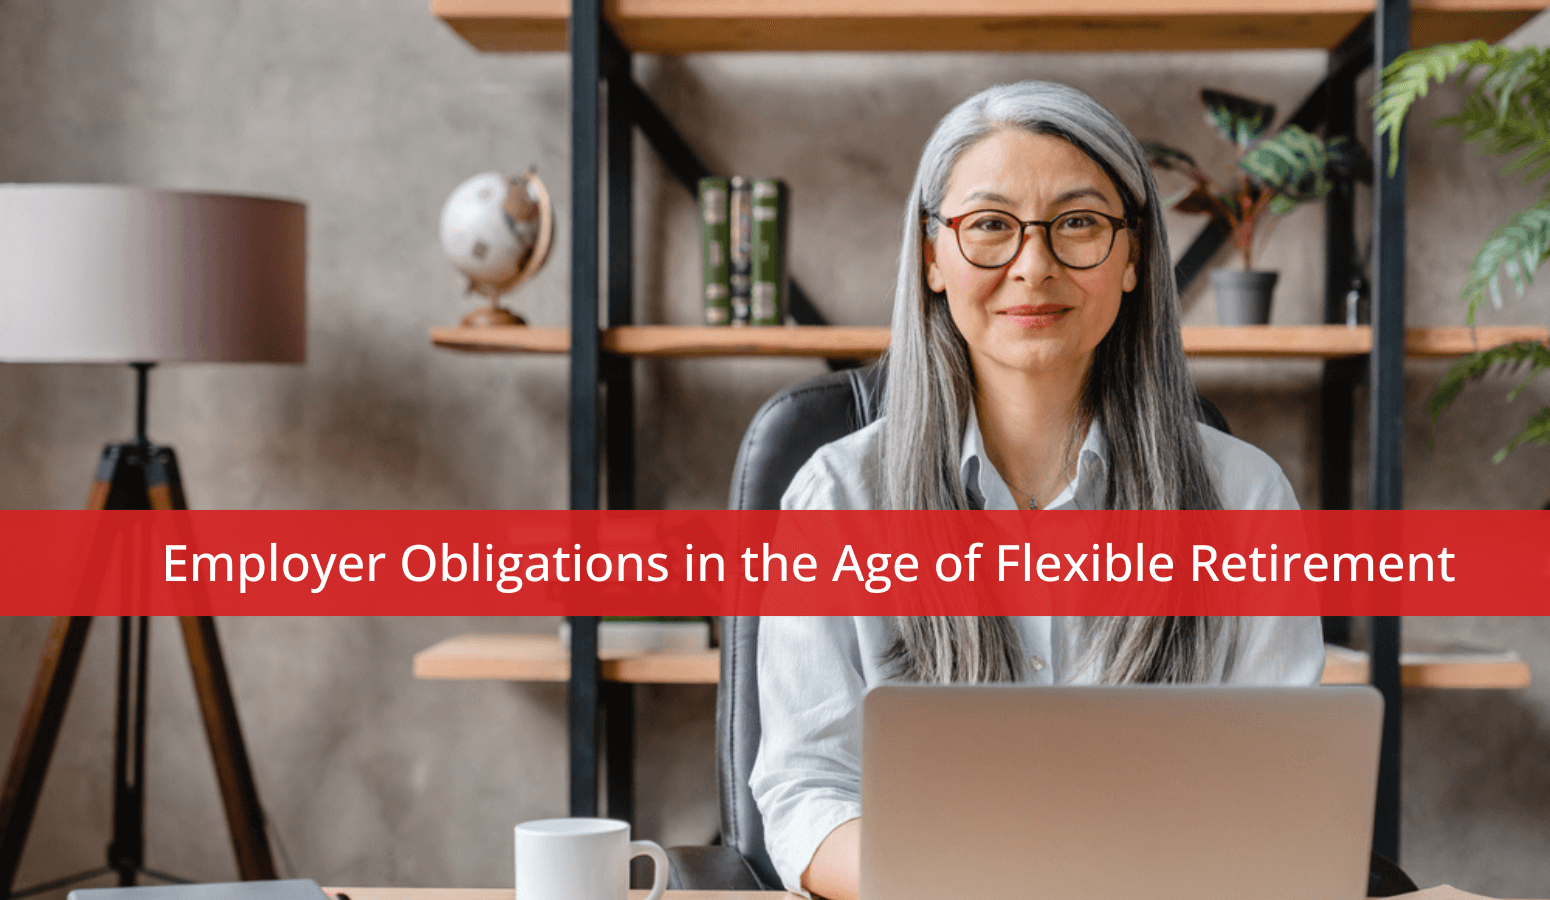 Featured image for “Employer Obligations in the Age of Flexible Retirement”